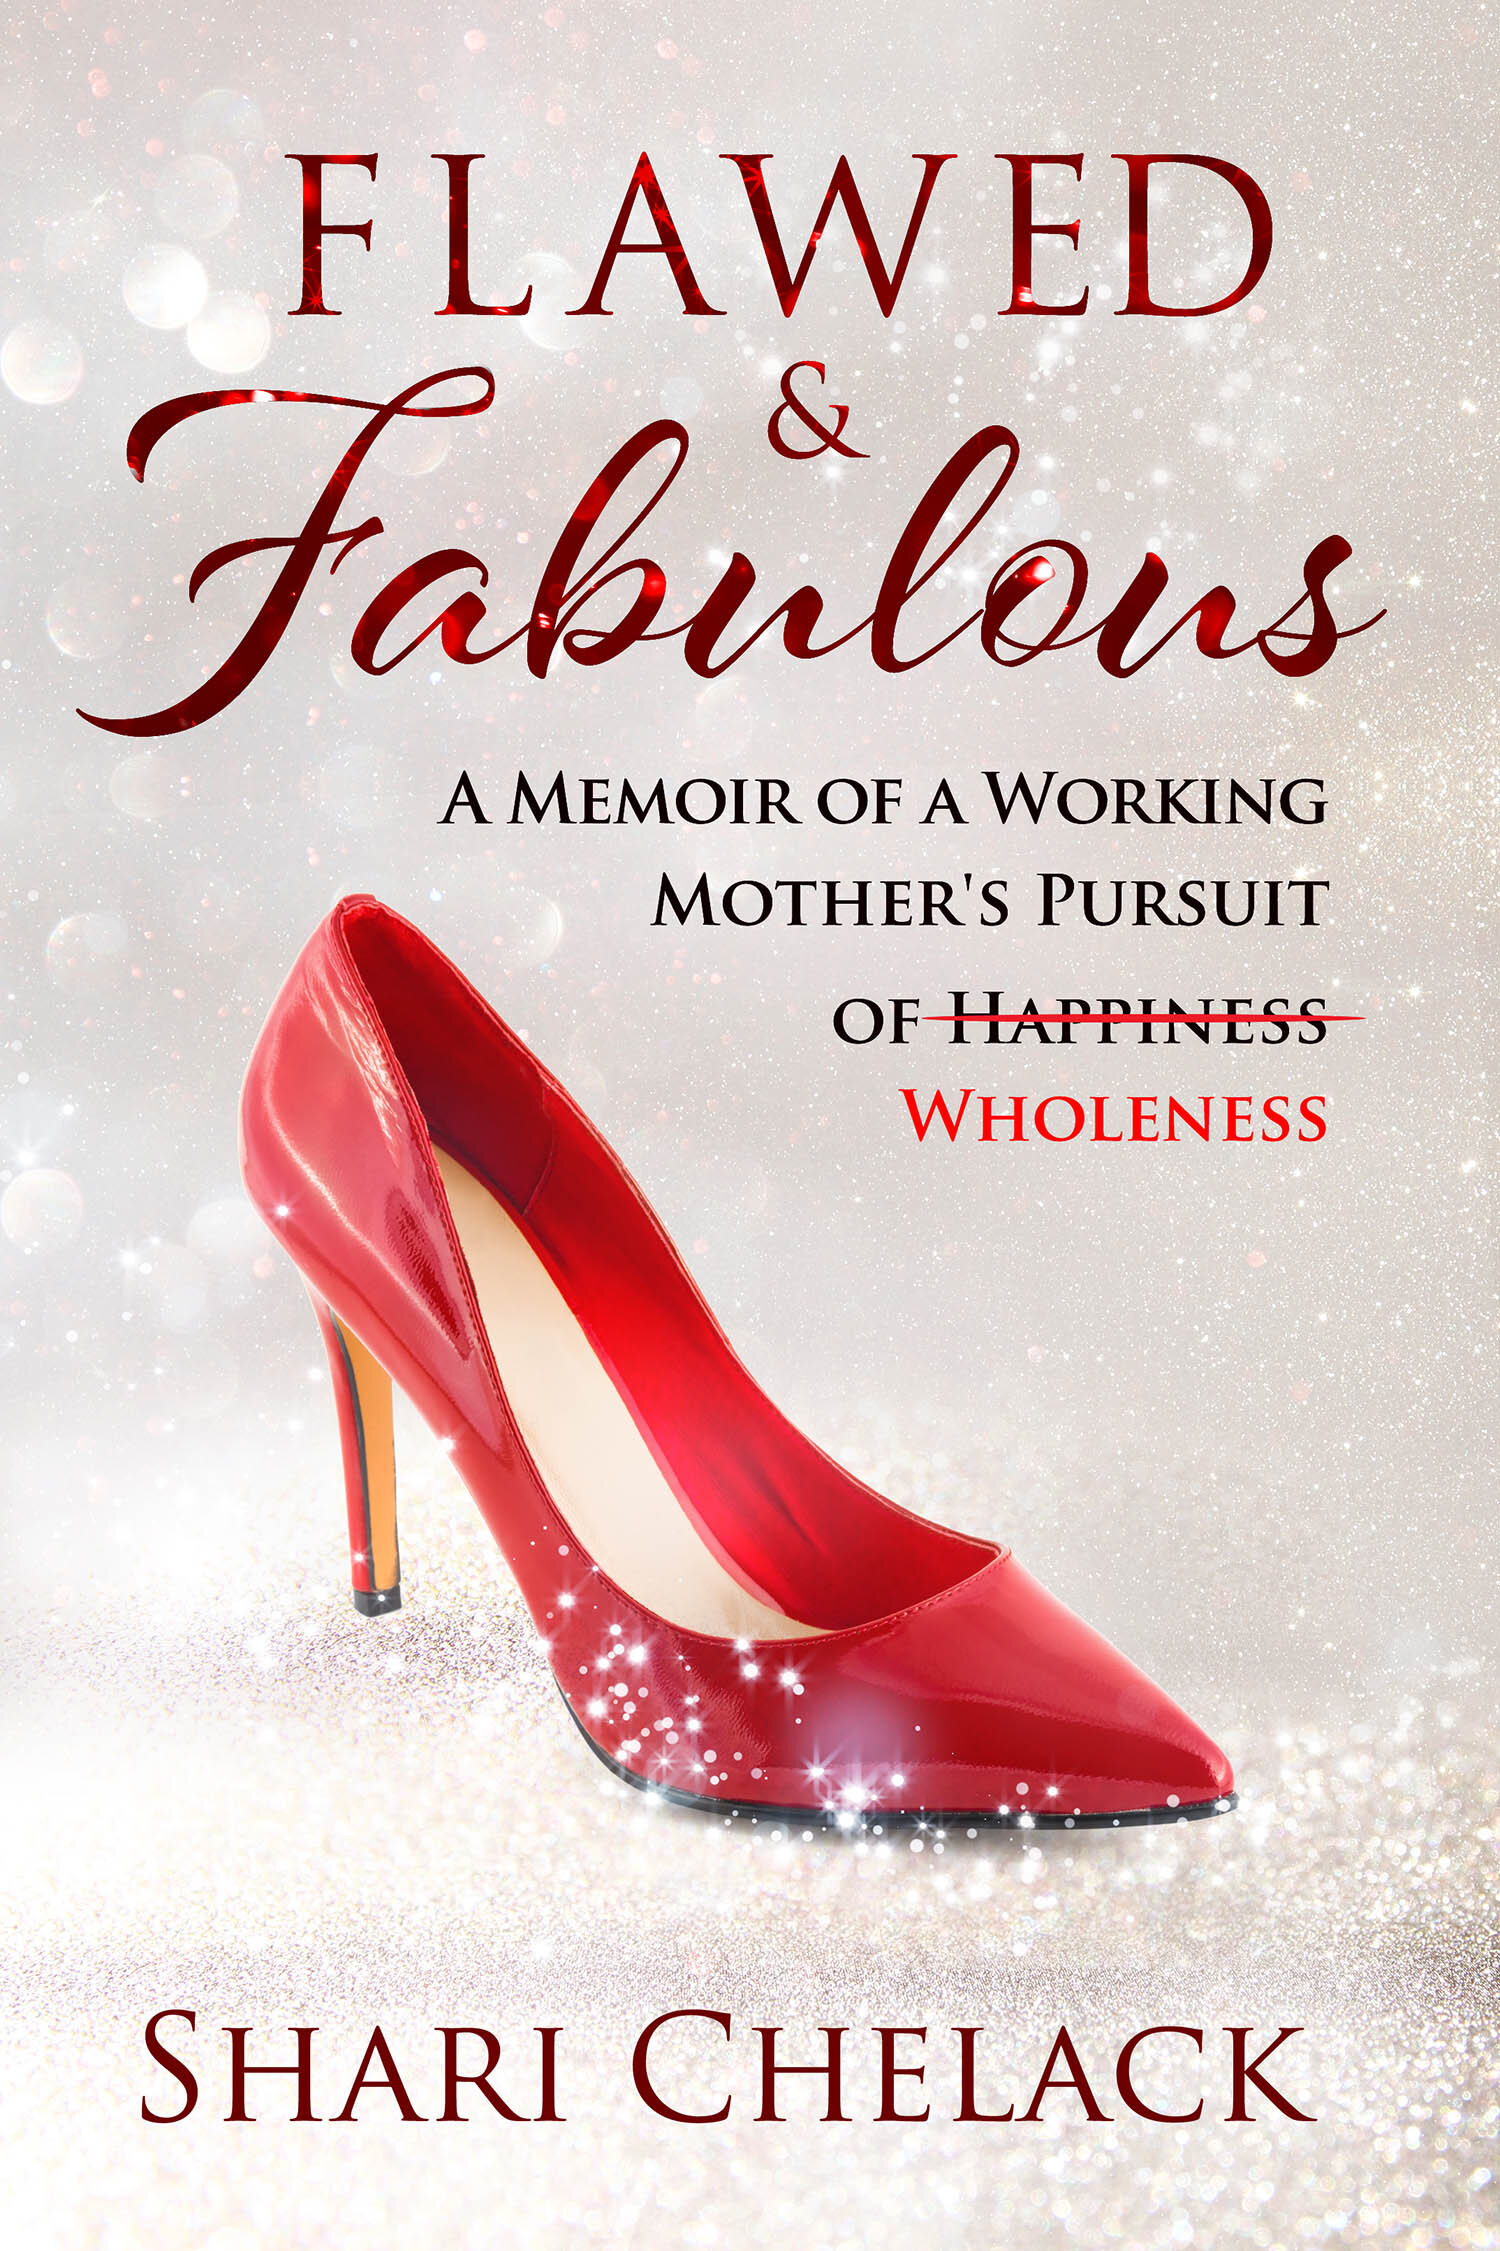 Flawed & Fabulous: A Memoir of a Working Mom's Pursuit of Wholeness by Shari Chelack (Copy)